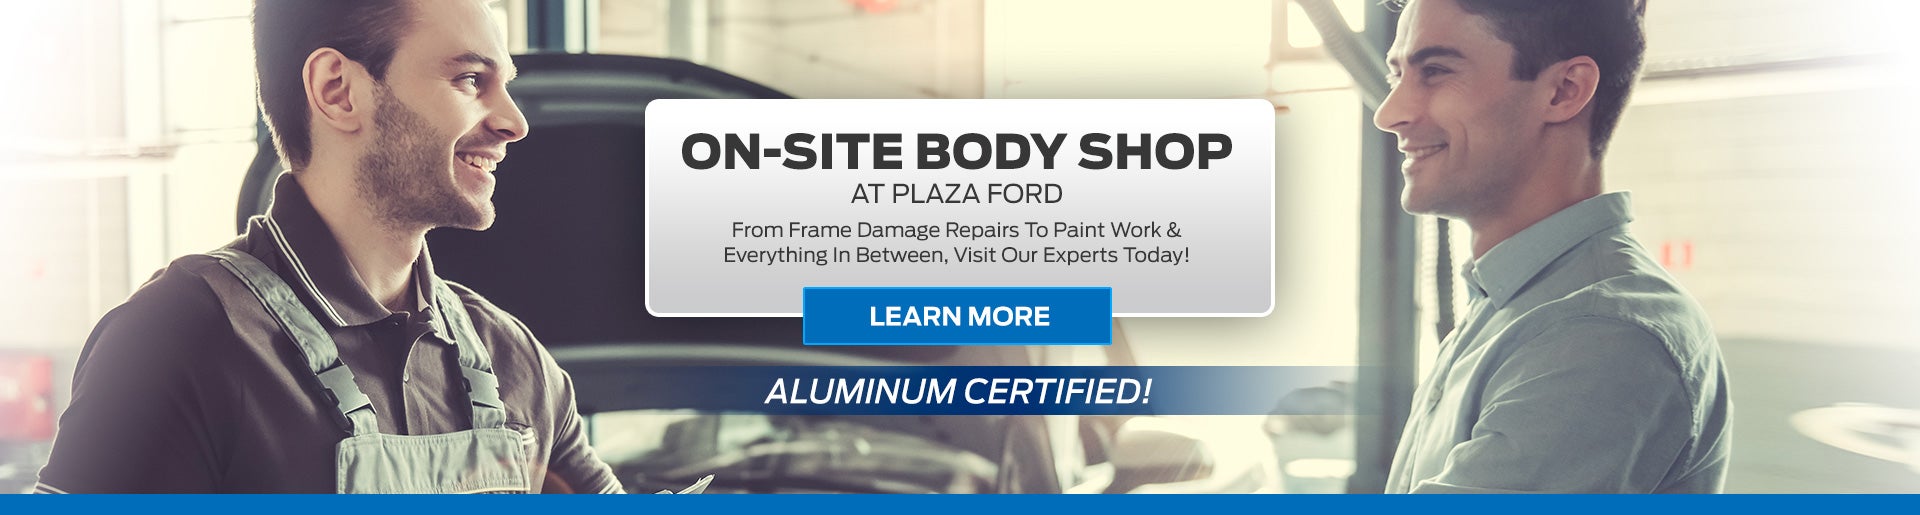 Learn More About Our On-Site Body Shop